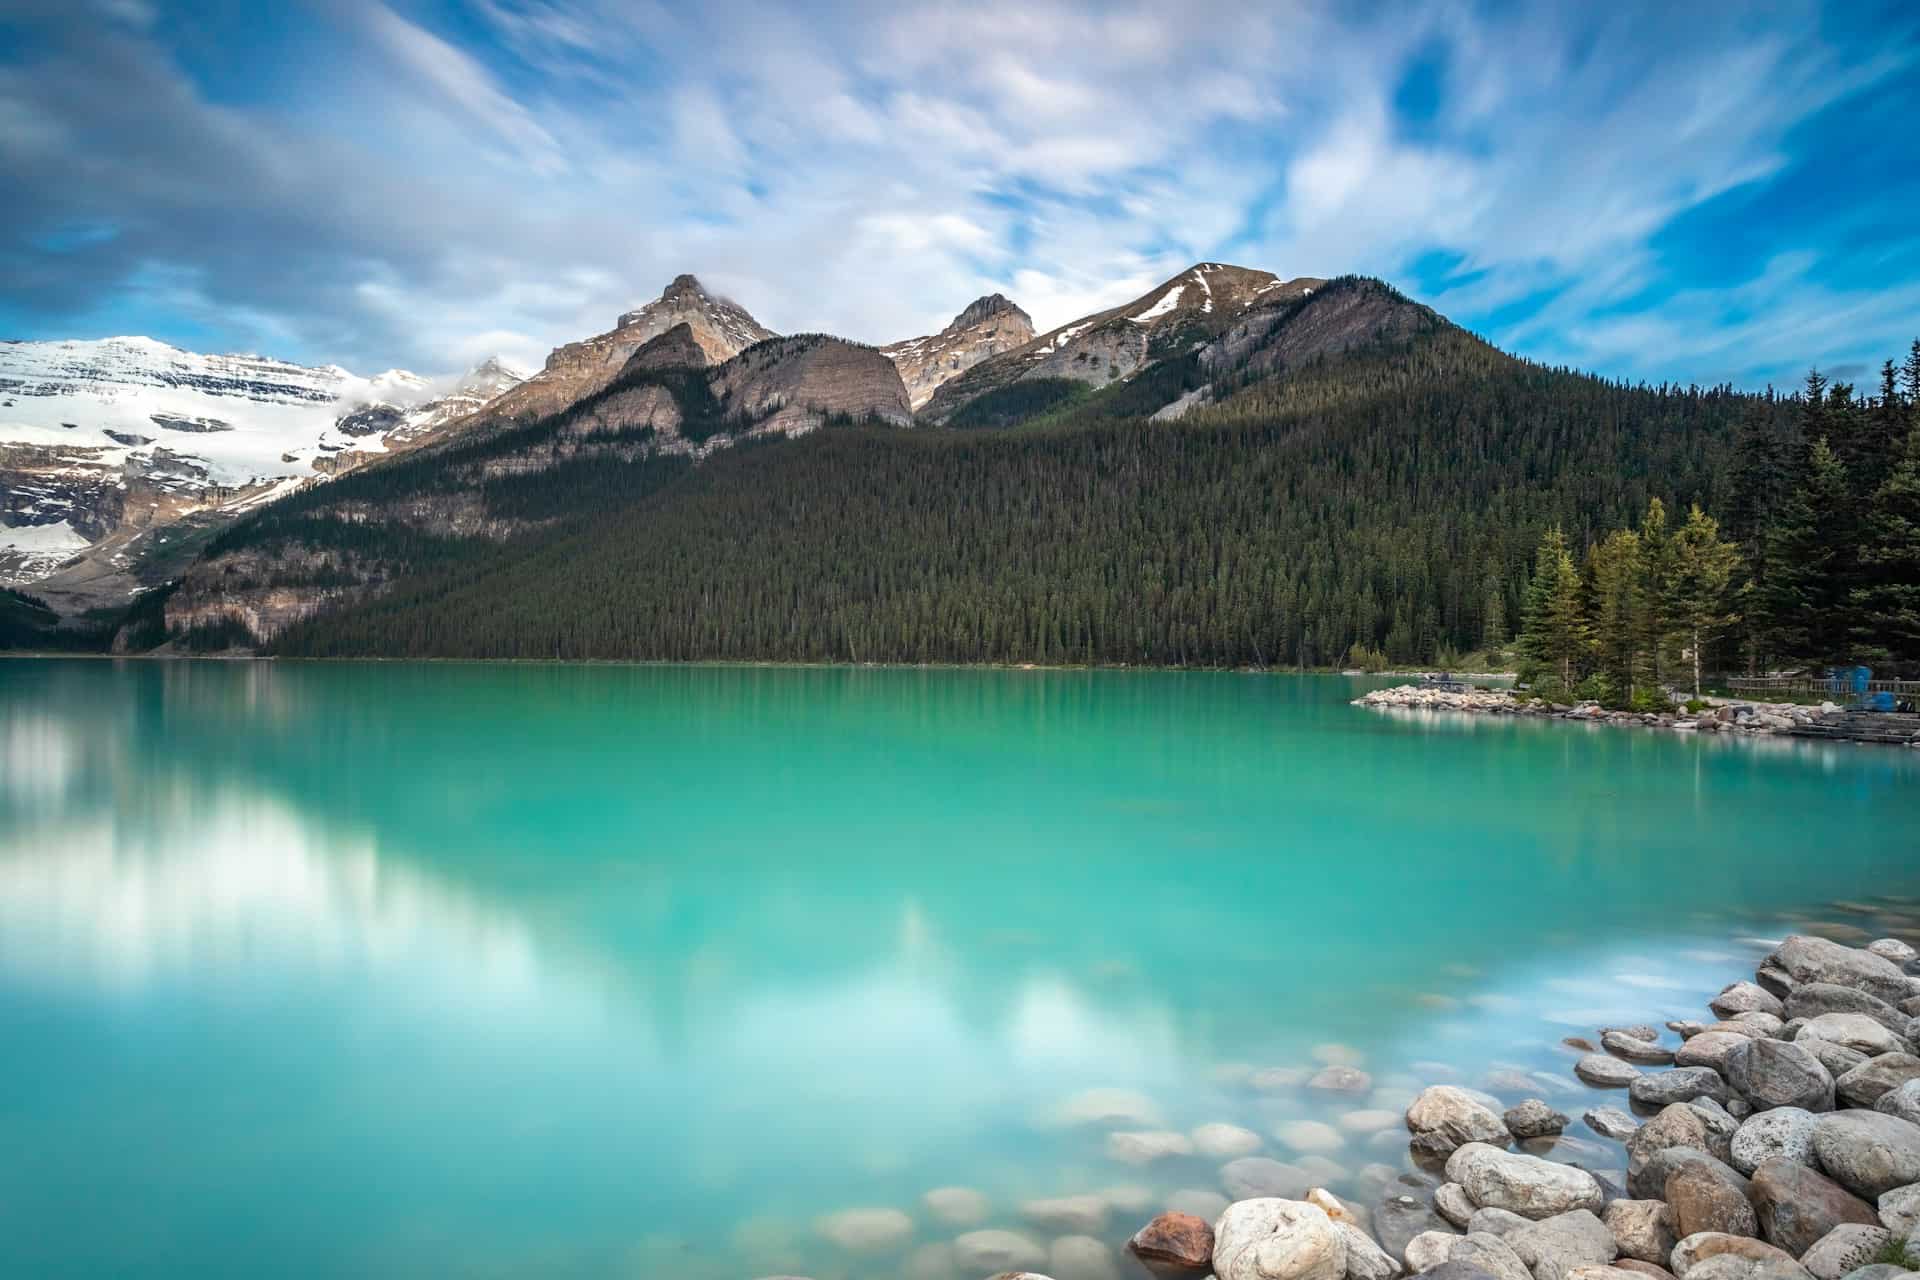 Lake Louise blue, blue waters with mountains in the background in Banff National Park, Canada